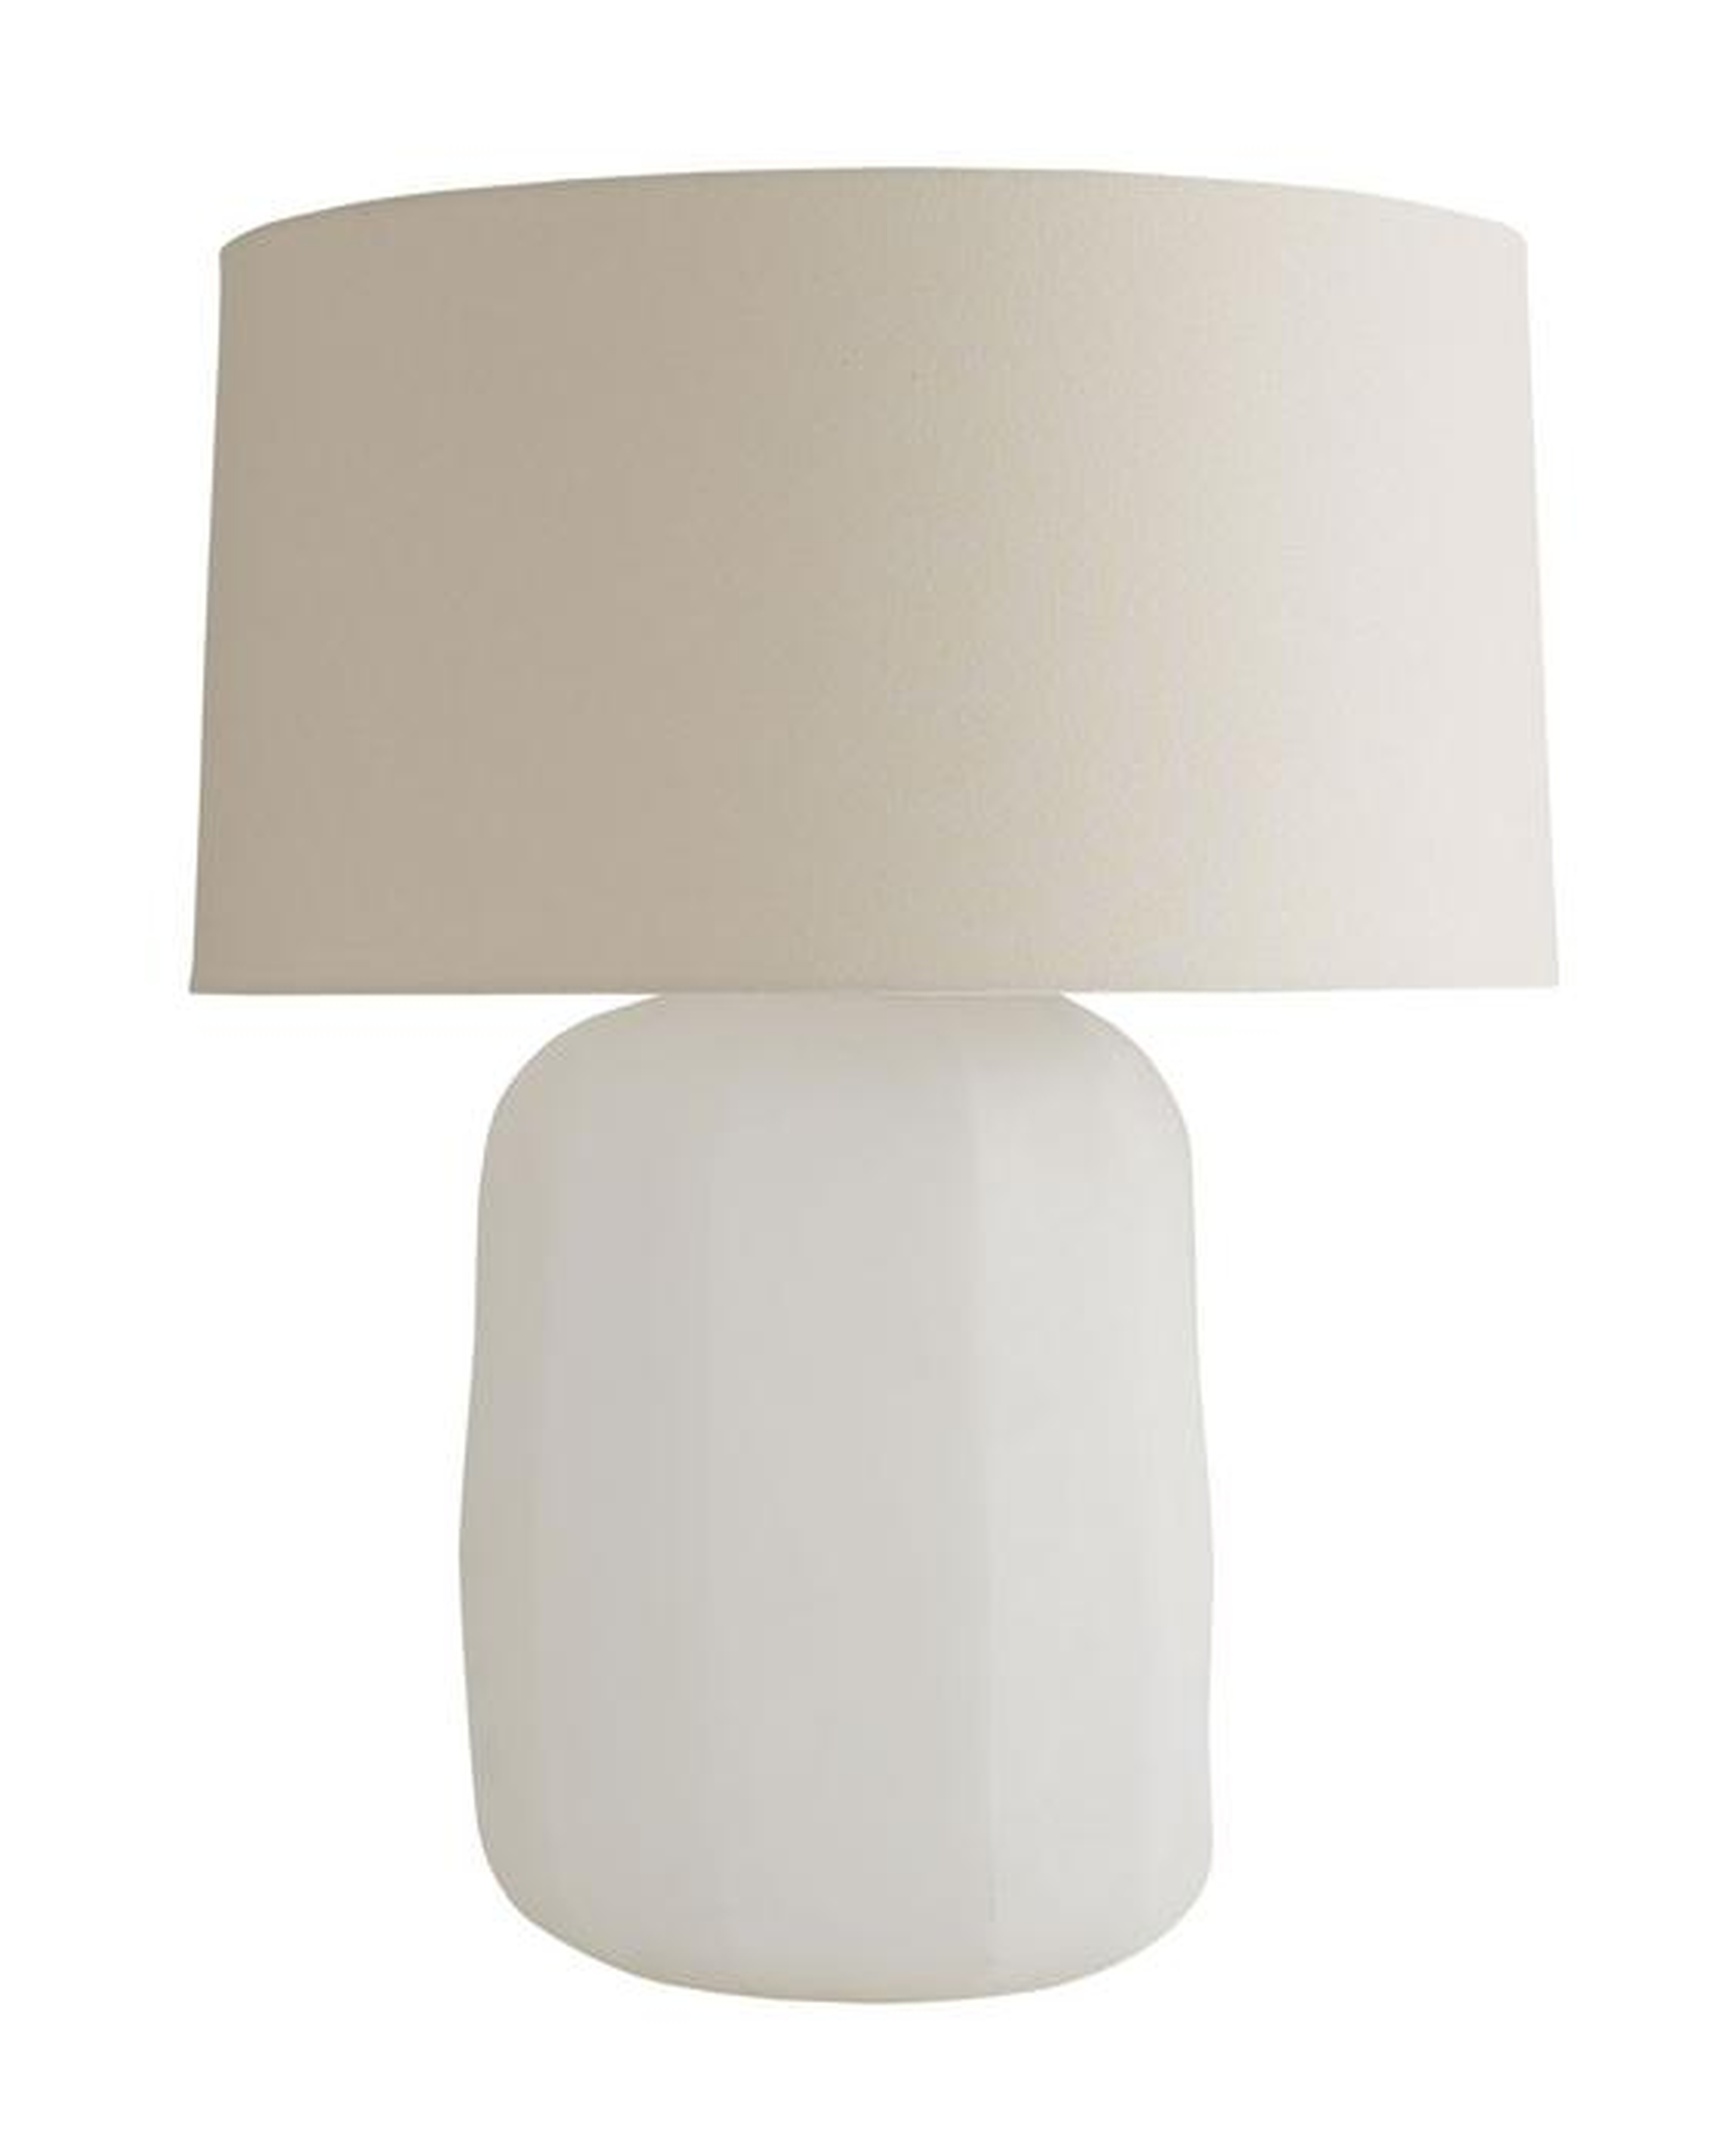 Frio Table Lamp - McGee & Co.